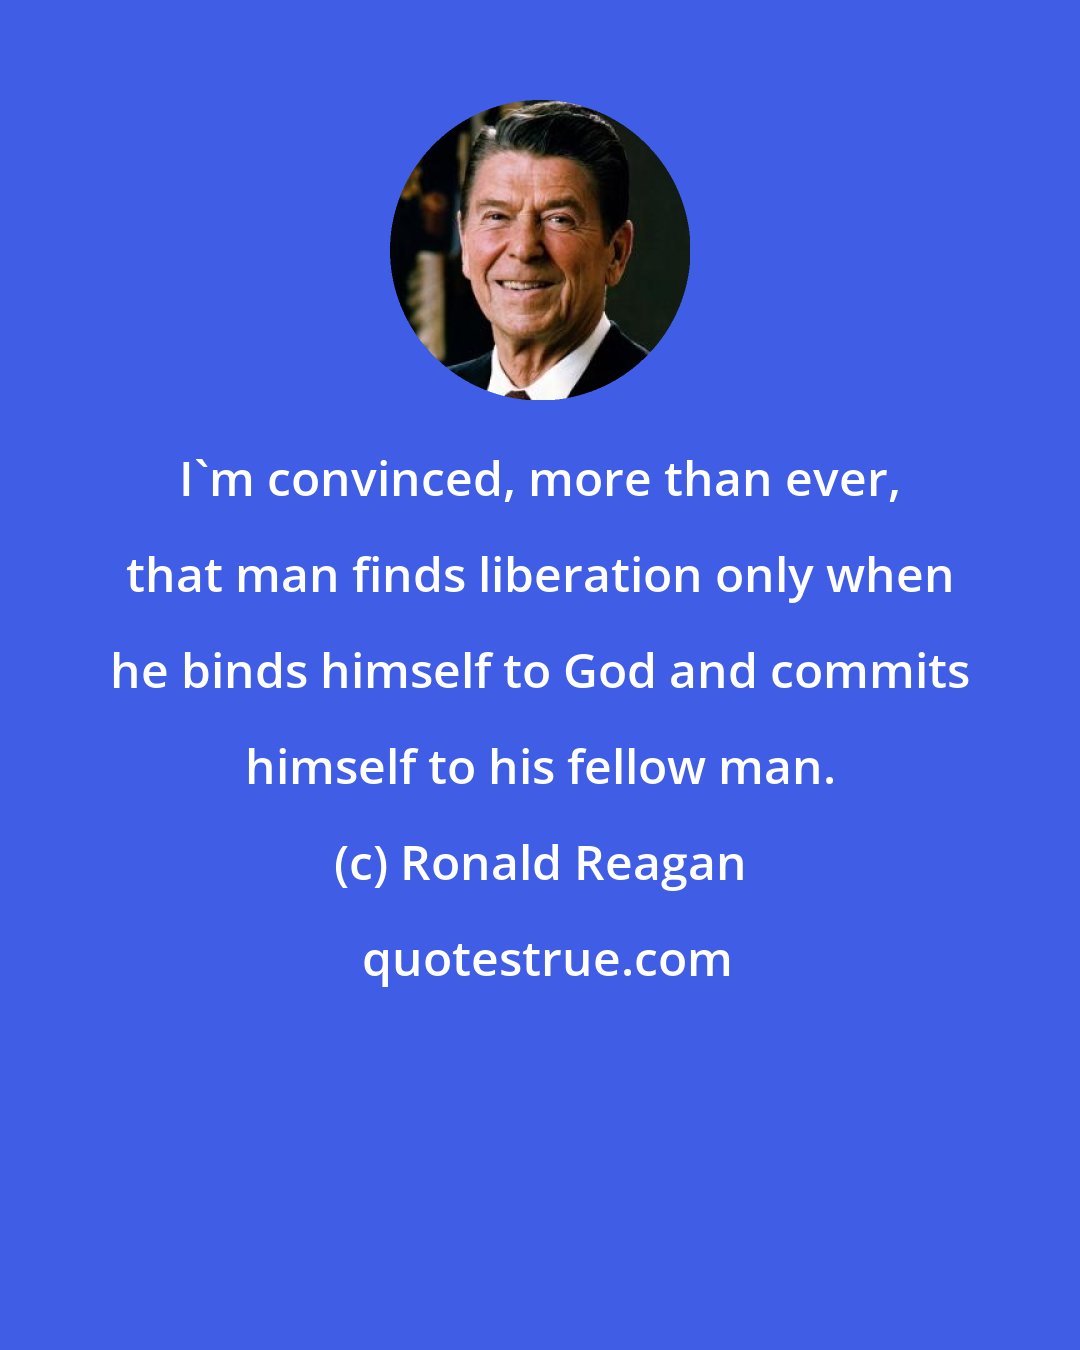 Ronald Reagan: I'm convinced, more than ever, that man finds liberation only when he binds himself to God and commits himself to his fellow man.